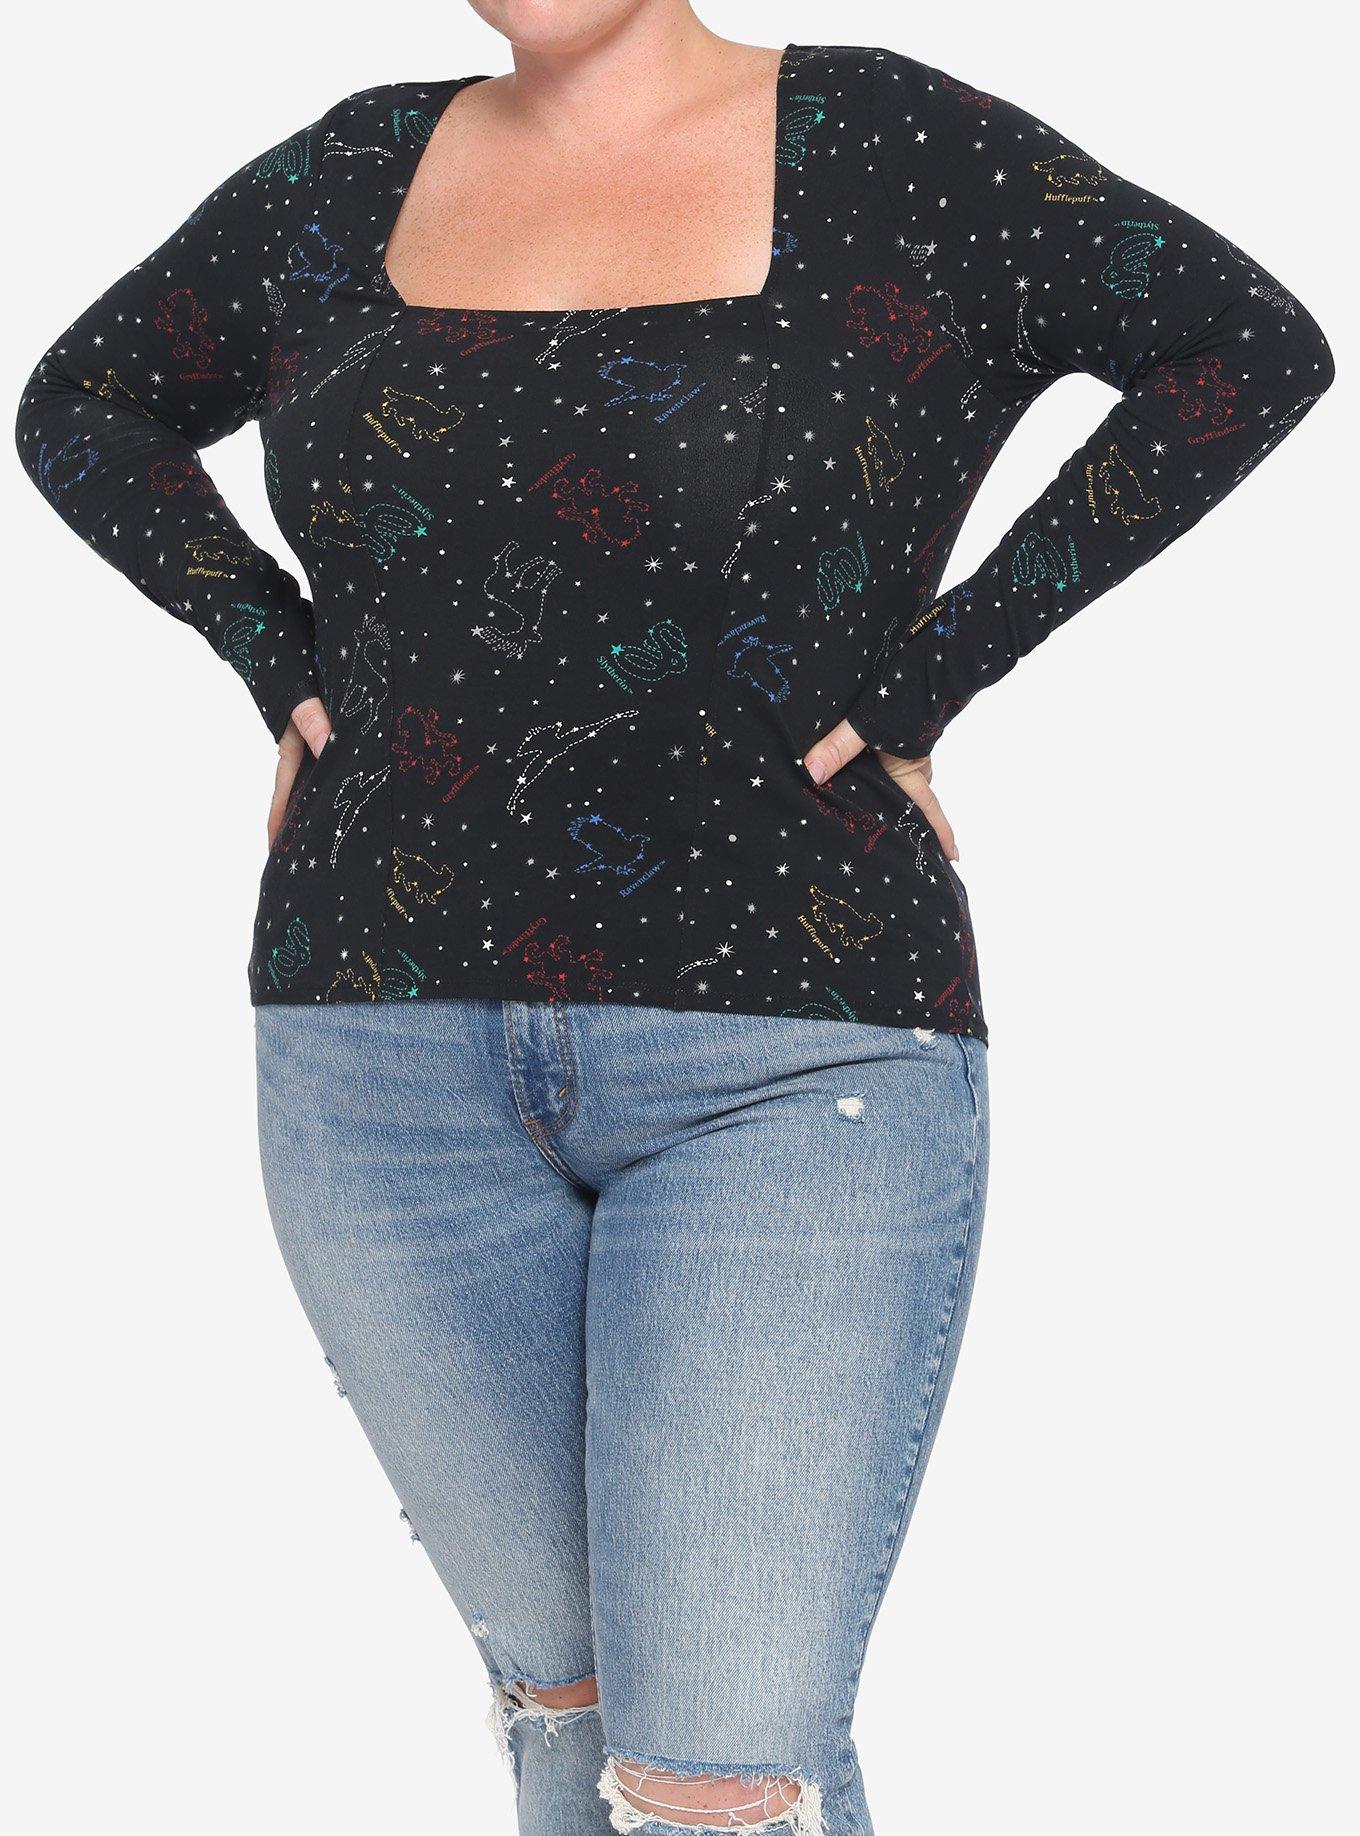 Harry Potter Constellation Girls Long-Sleeve Top Plus Size, MULTI, hi-res